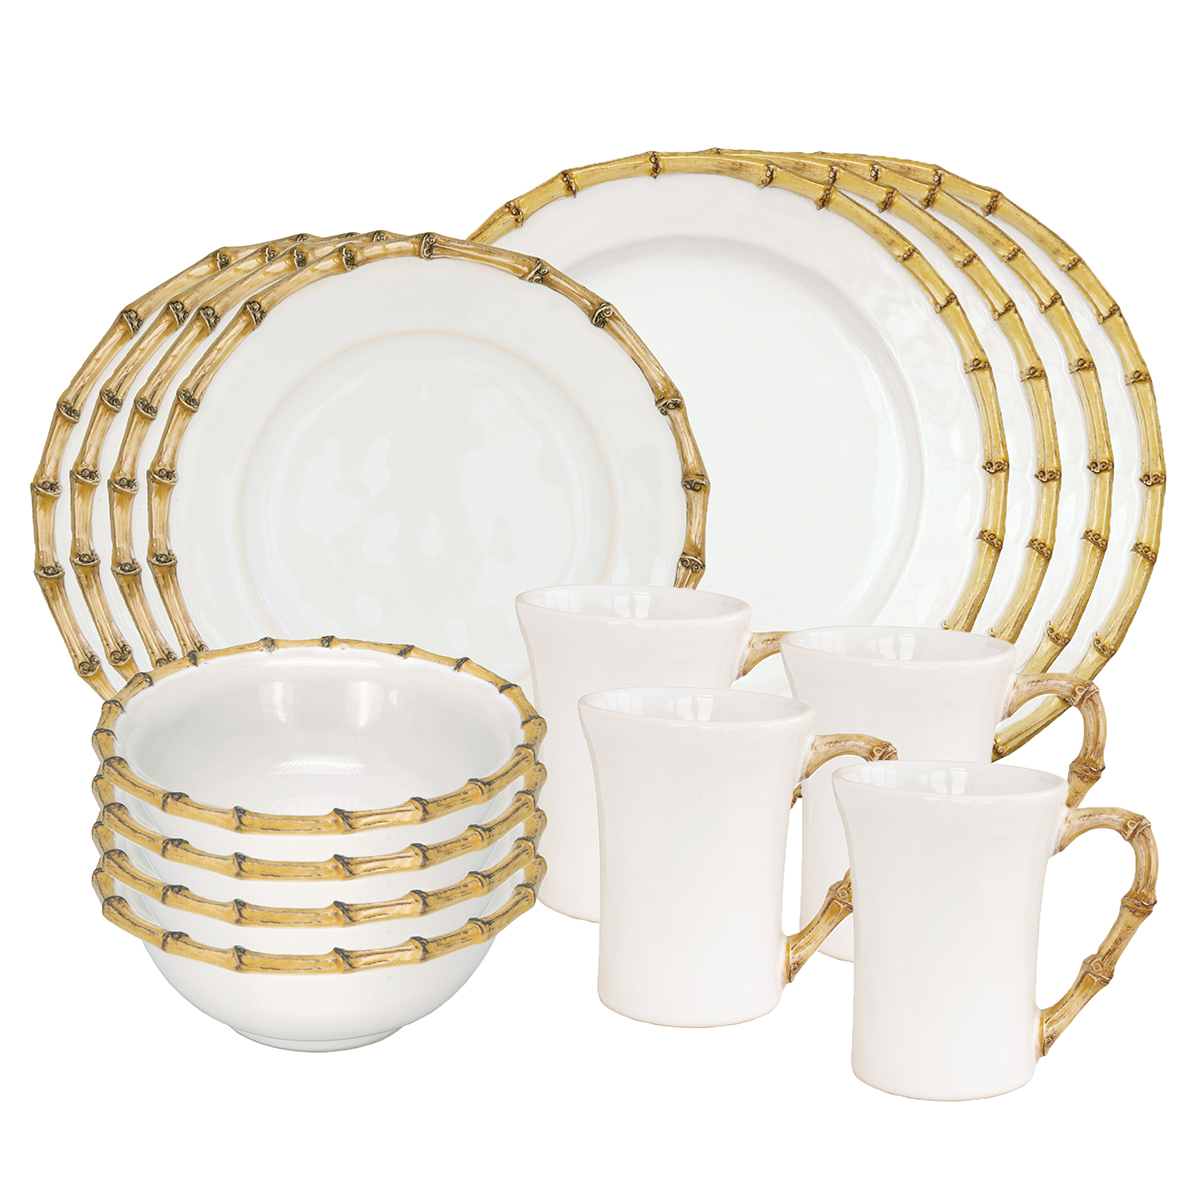 Bringing a sense of rustic home decor to your dinner table, this 16 piece Bamboo Tableware set provides service for four dinner guests.